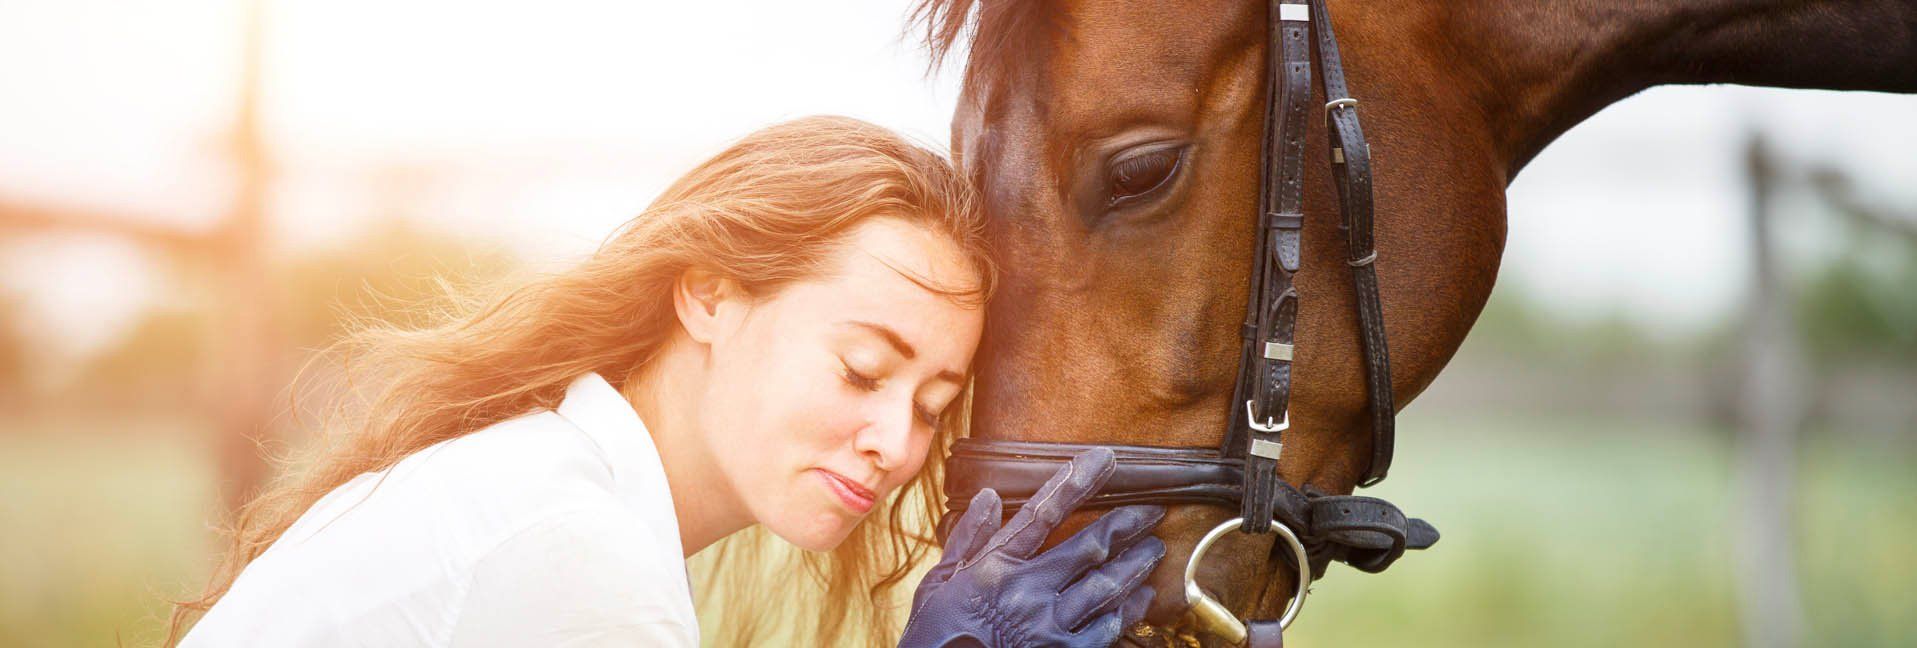 Say What? - Understand mixed signals between horses and humans